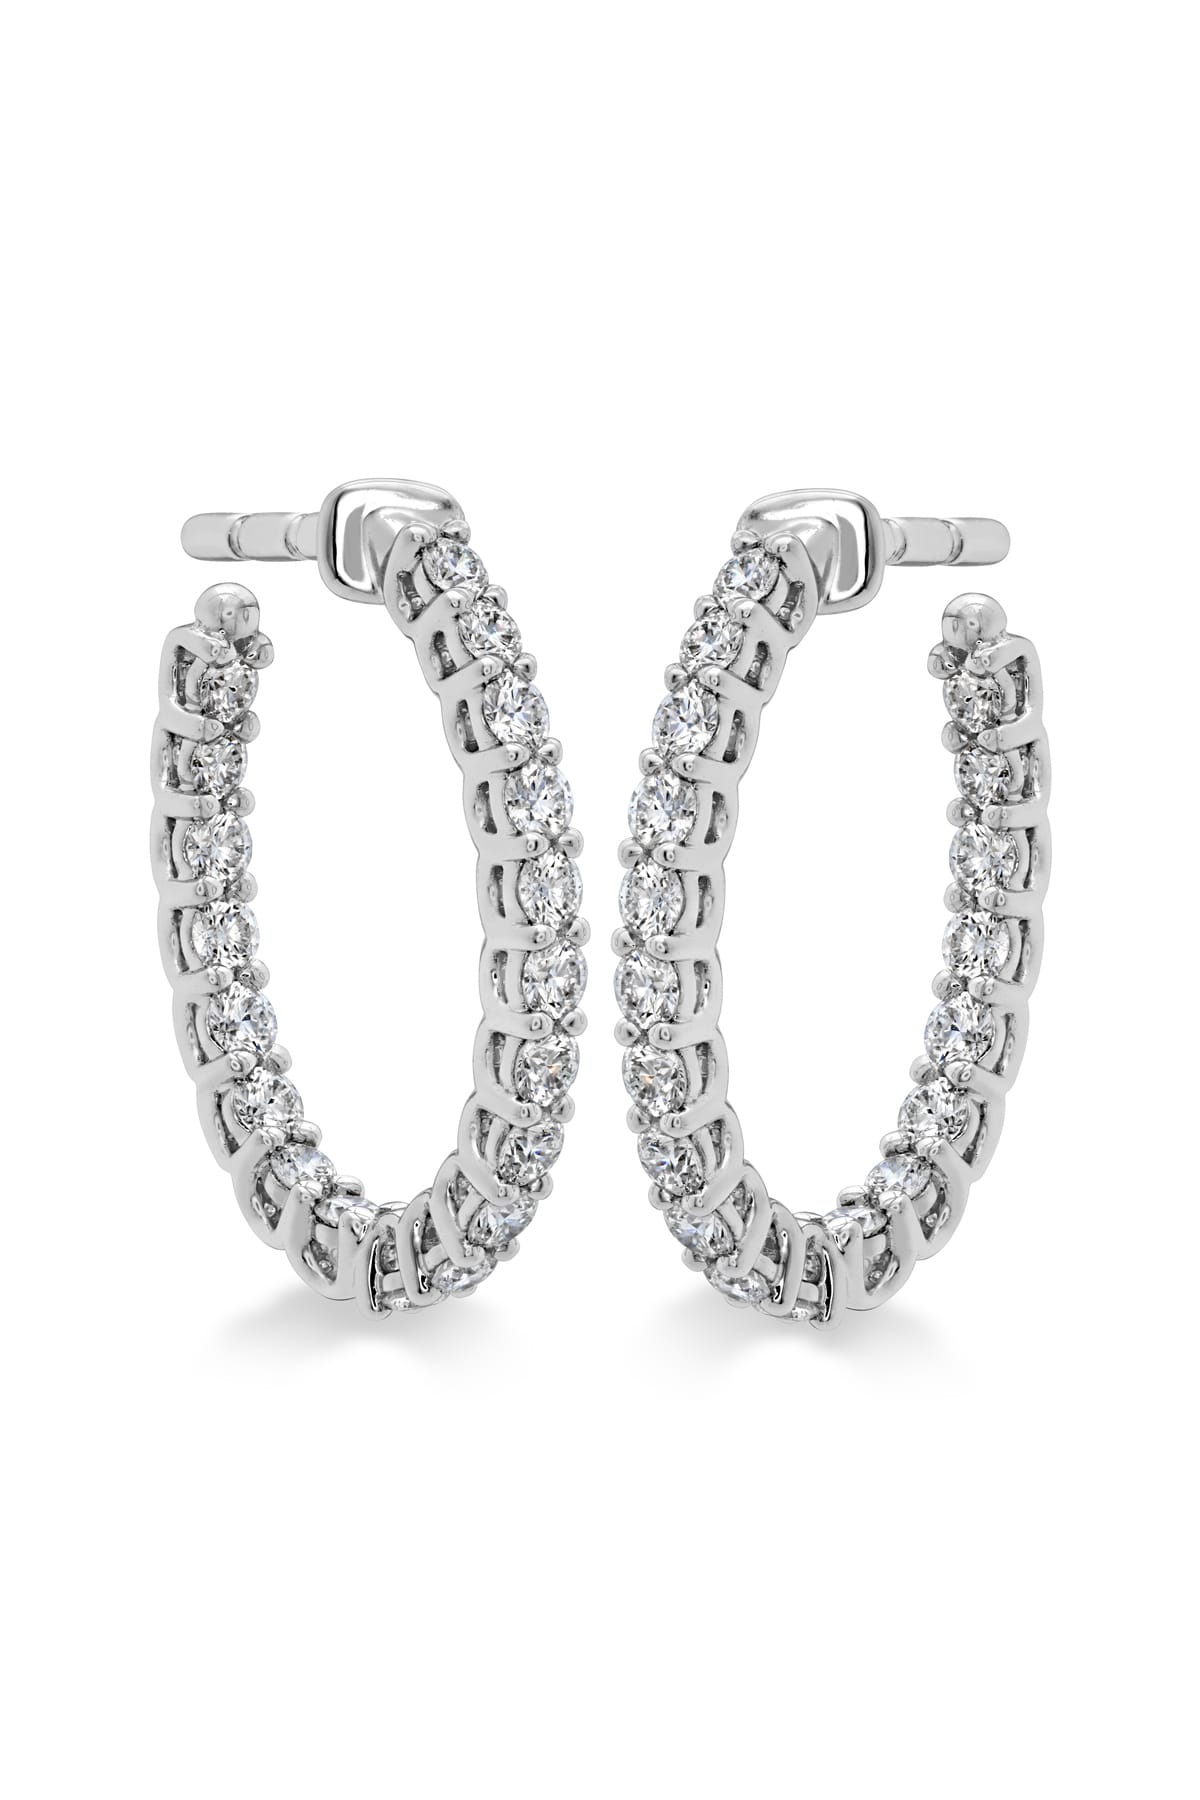 Small Signature Oval Hoop Earrings From Hearts On Fire available at LeGassick Diamonds and Jewellery Gold Coast, Australia.